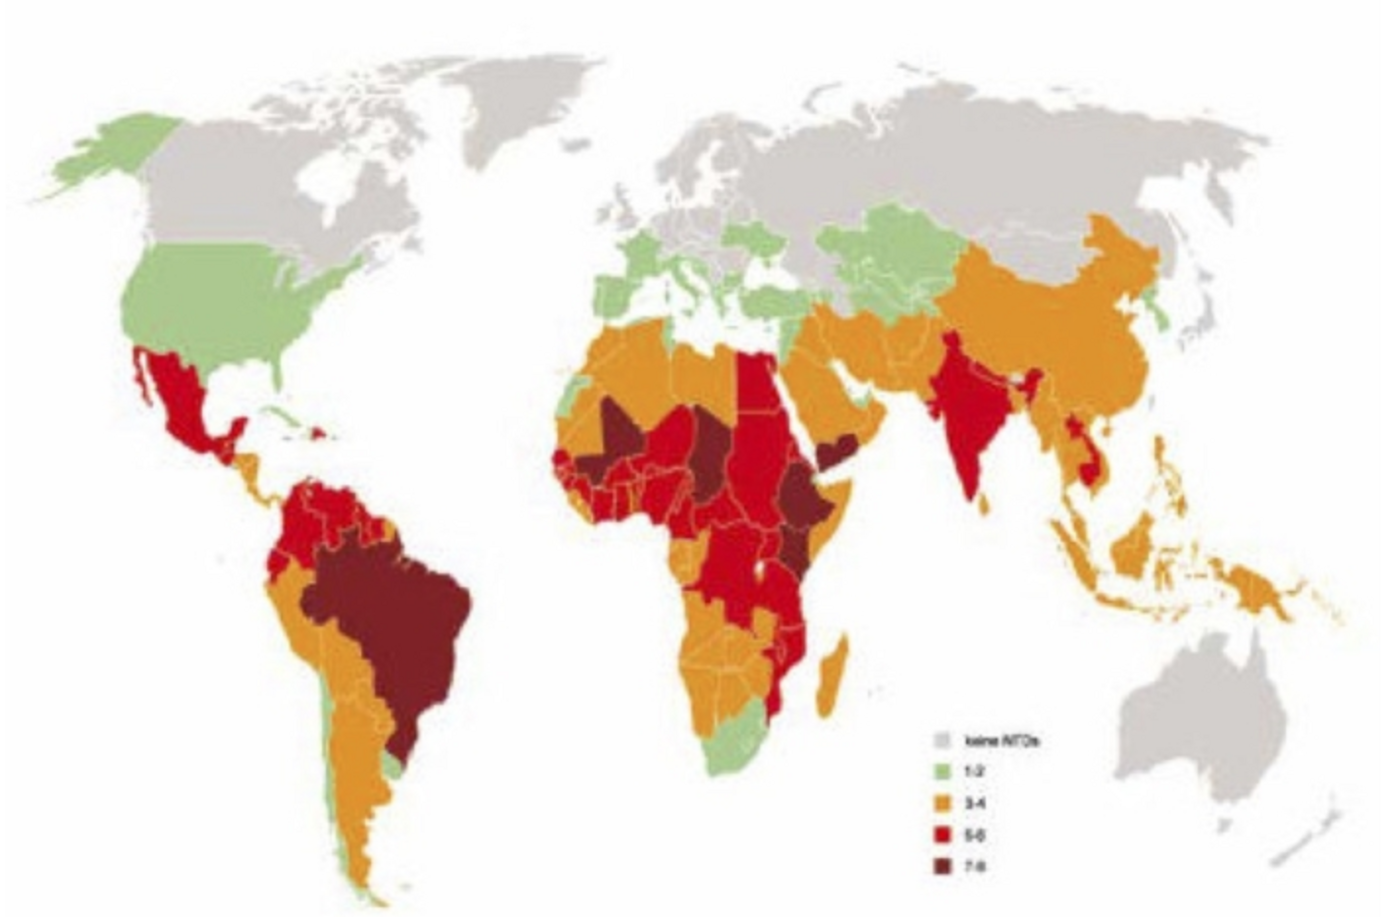 The map shows the distribution of NTDs in the world.